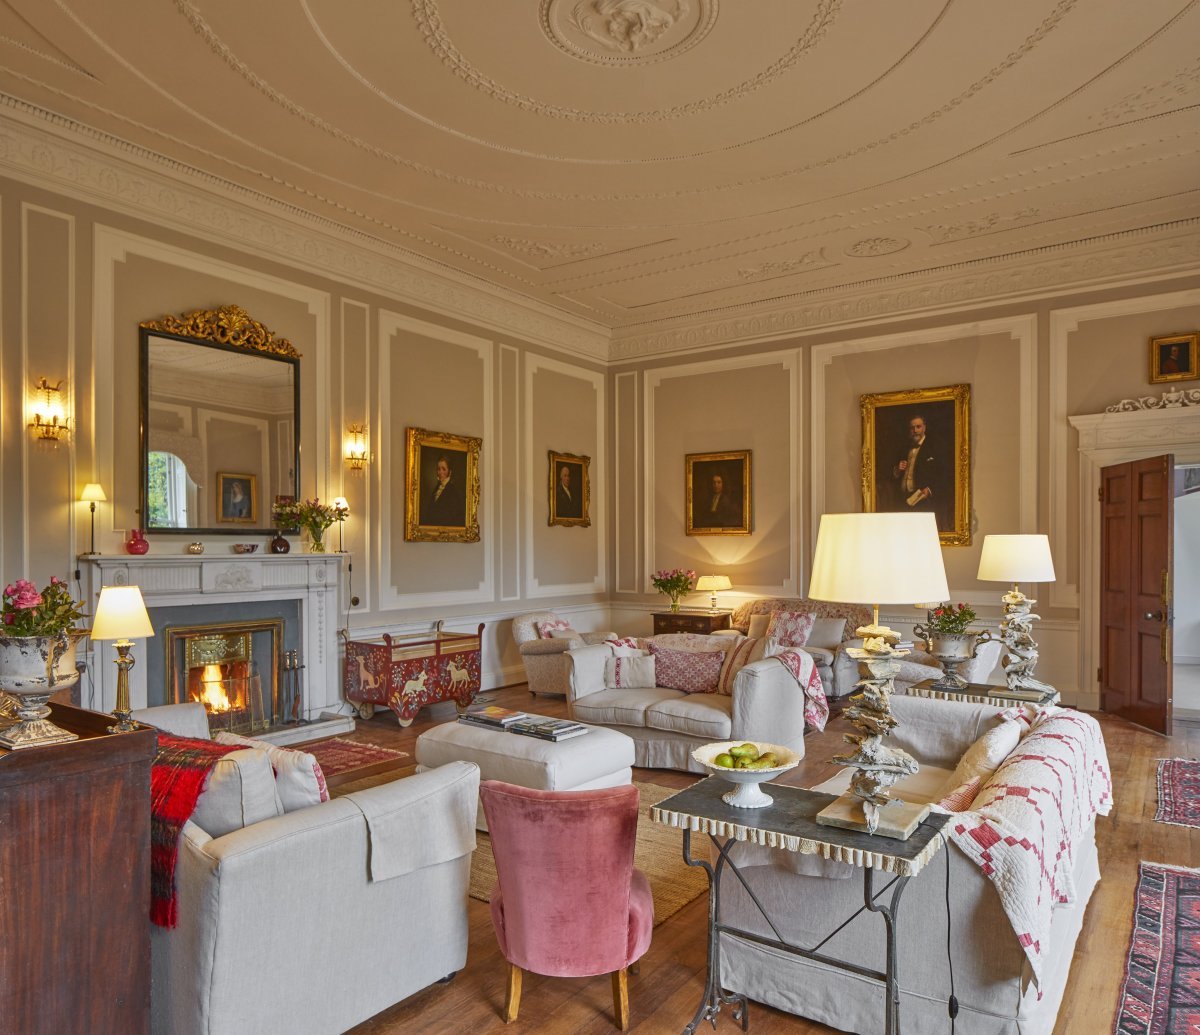 The drawing room is dominated by a 250-year old ceiling with ornate plasterwork created by a master craftsman